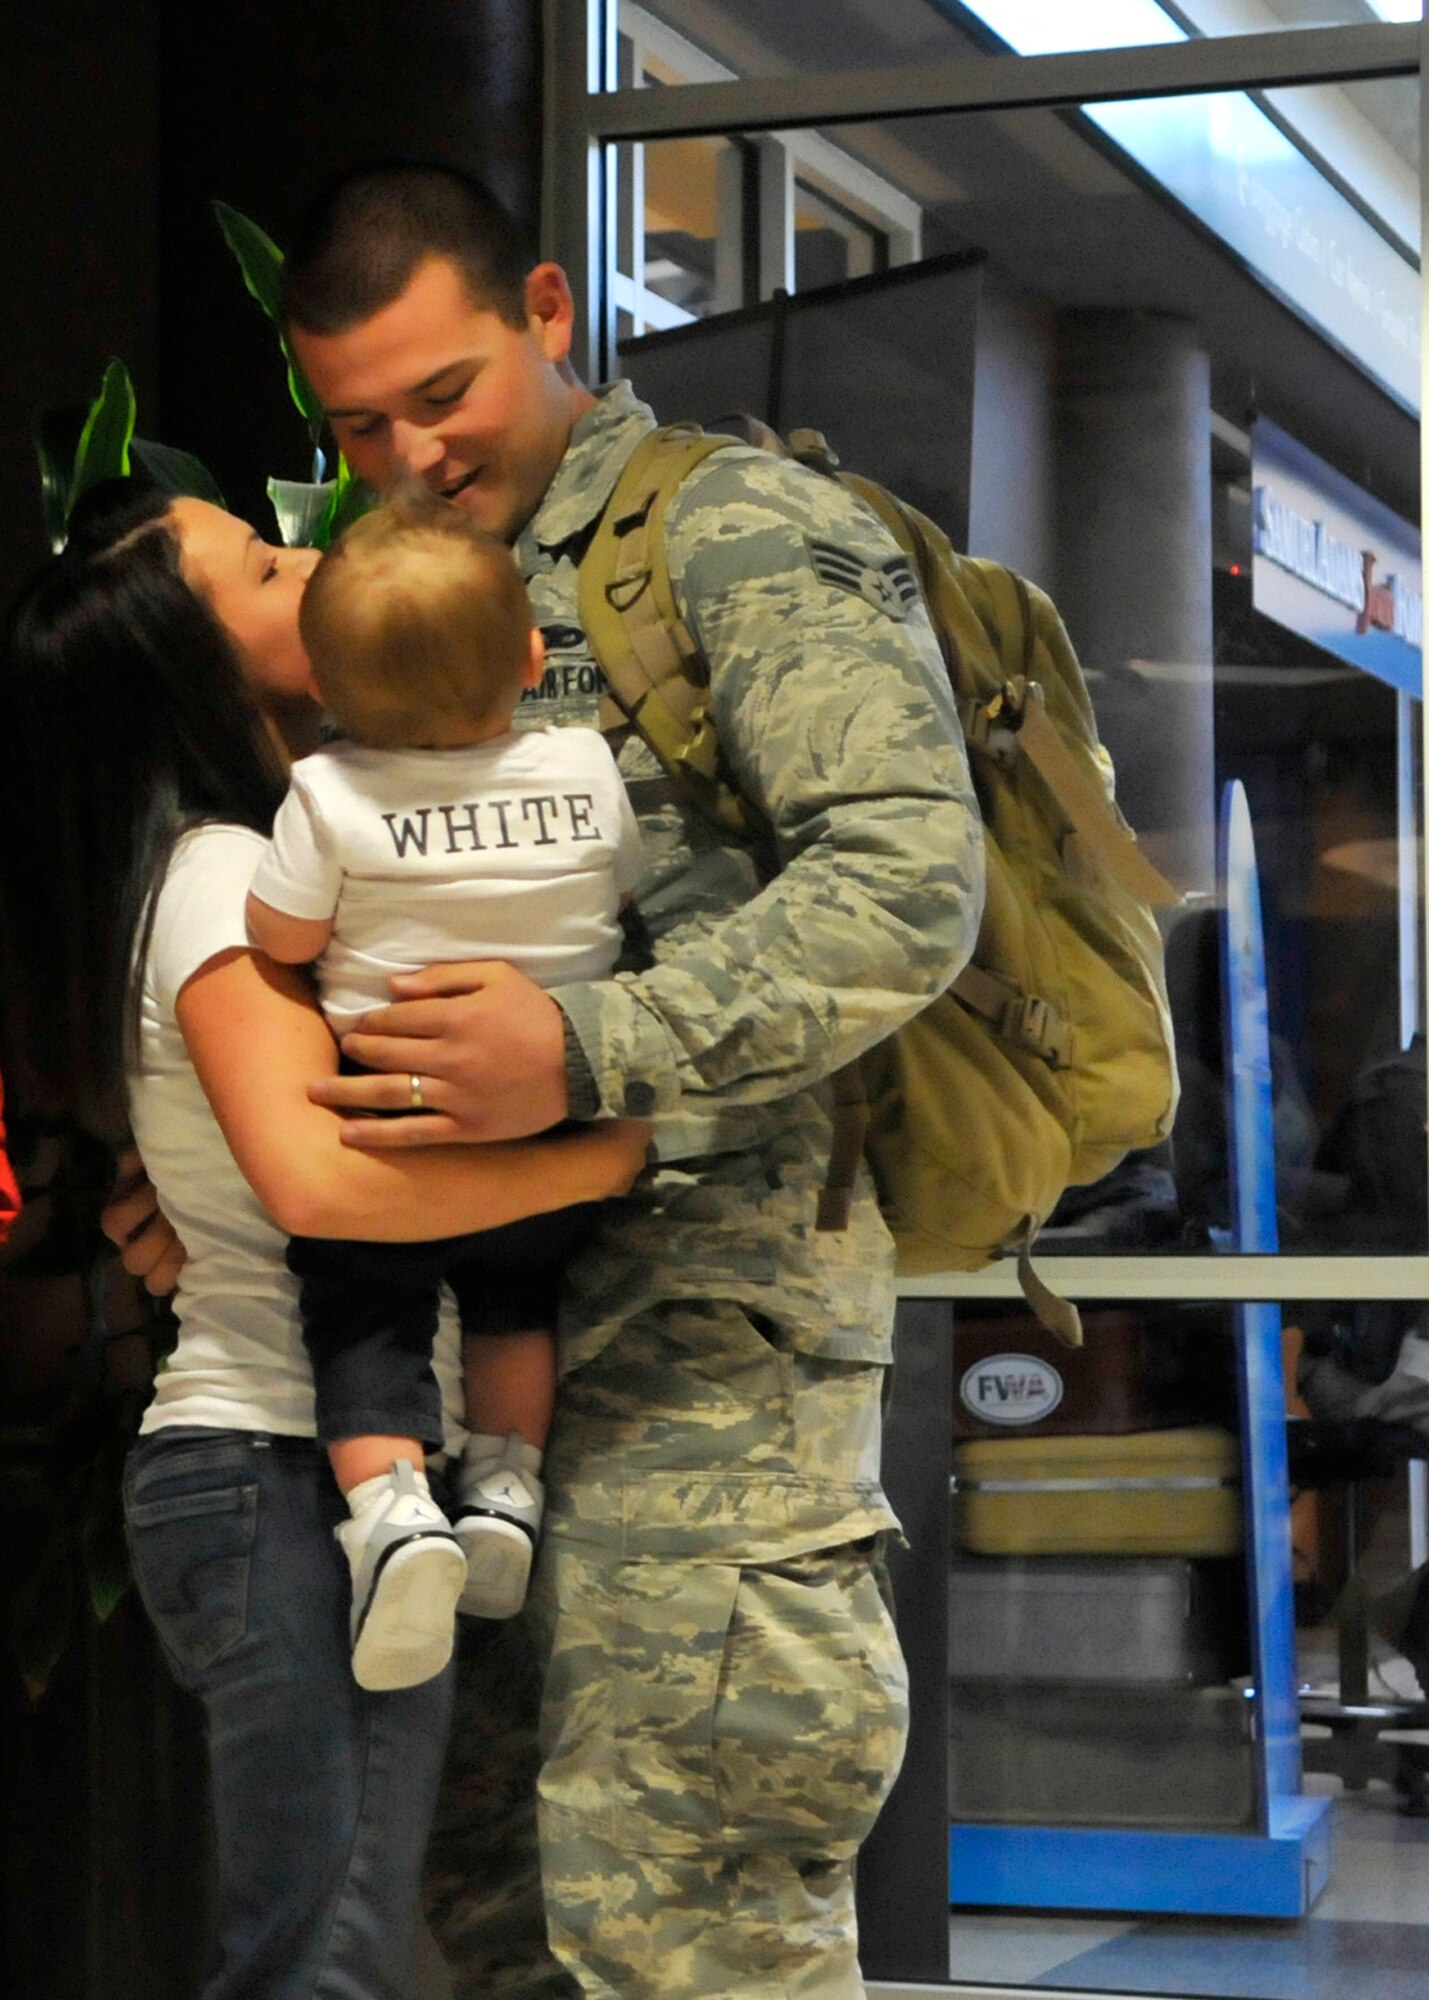 FORT WAYNE AIR NATIONAL GUARD BASE, Ind. – Senior Airman Mathew White, 122nd Fighter Wing, Security Forces, embraces his wife and son as the 122nd Fighter Wing welcomed home more than two-dozen members from the 122nd Security Forces Squadron, as they returned from a six-month deployment in support of Operation Enduring Freedom, January 23, 2015 at the Fort Wayne International Airport.  Twenty-six Blacksnakes mobilized for this deployment and were assigned to the 379th Expeditionary Security Forces Squadron at Al Udeid Air Base, Qatar. The group spent one month in San Antonio conducting combat preparation, then transitioned to Qatar for six months. 